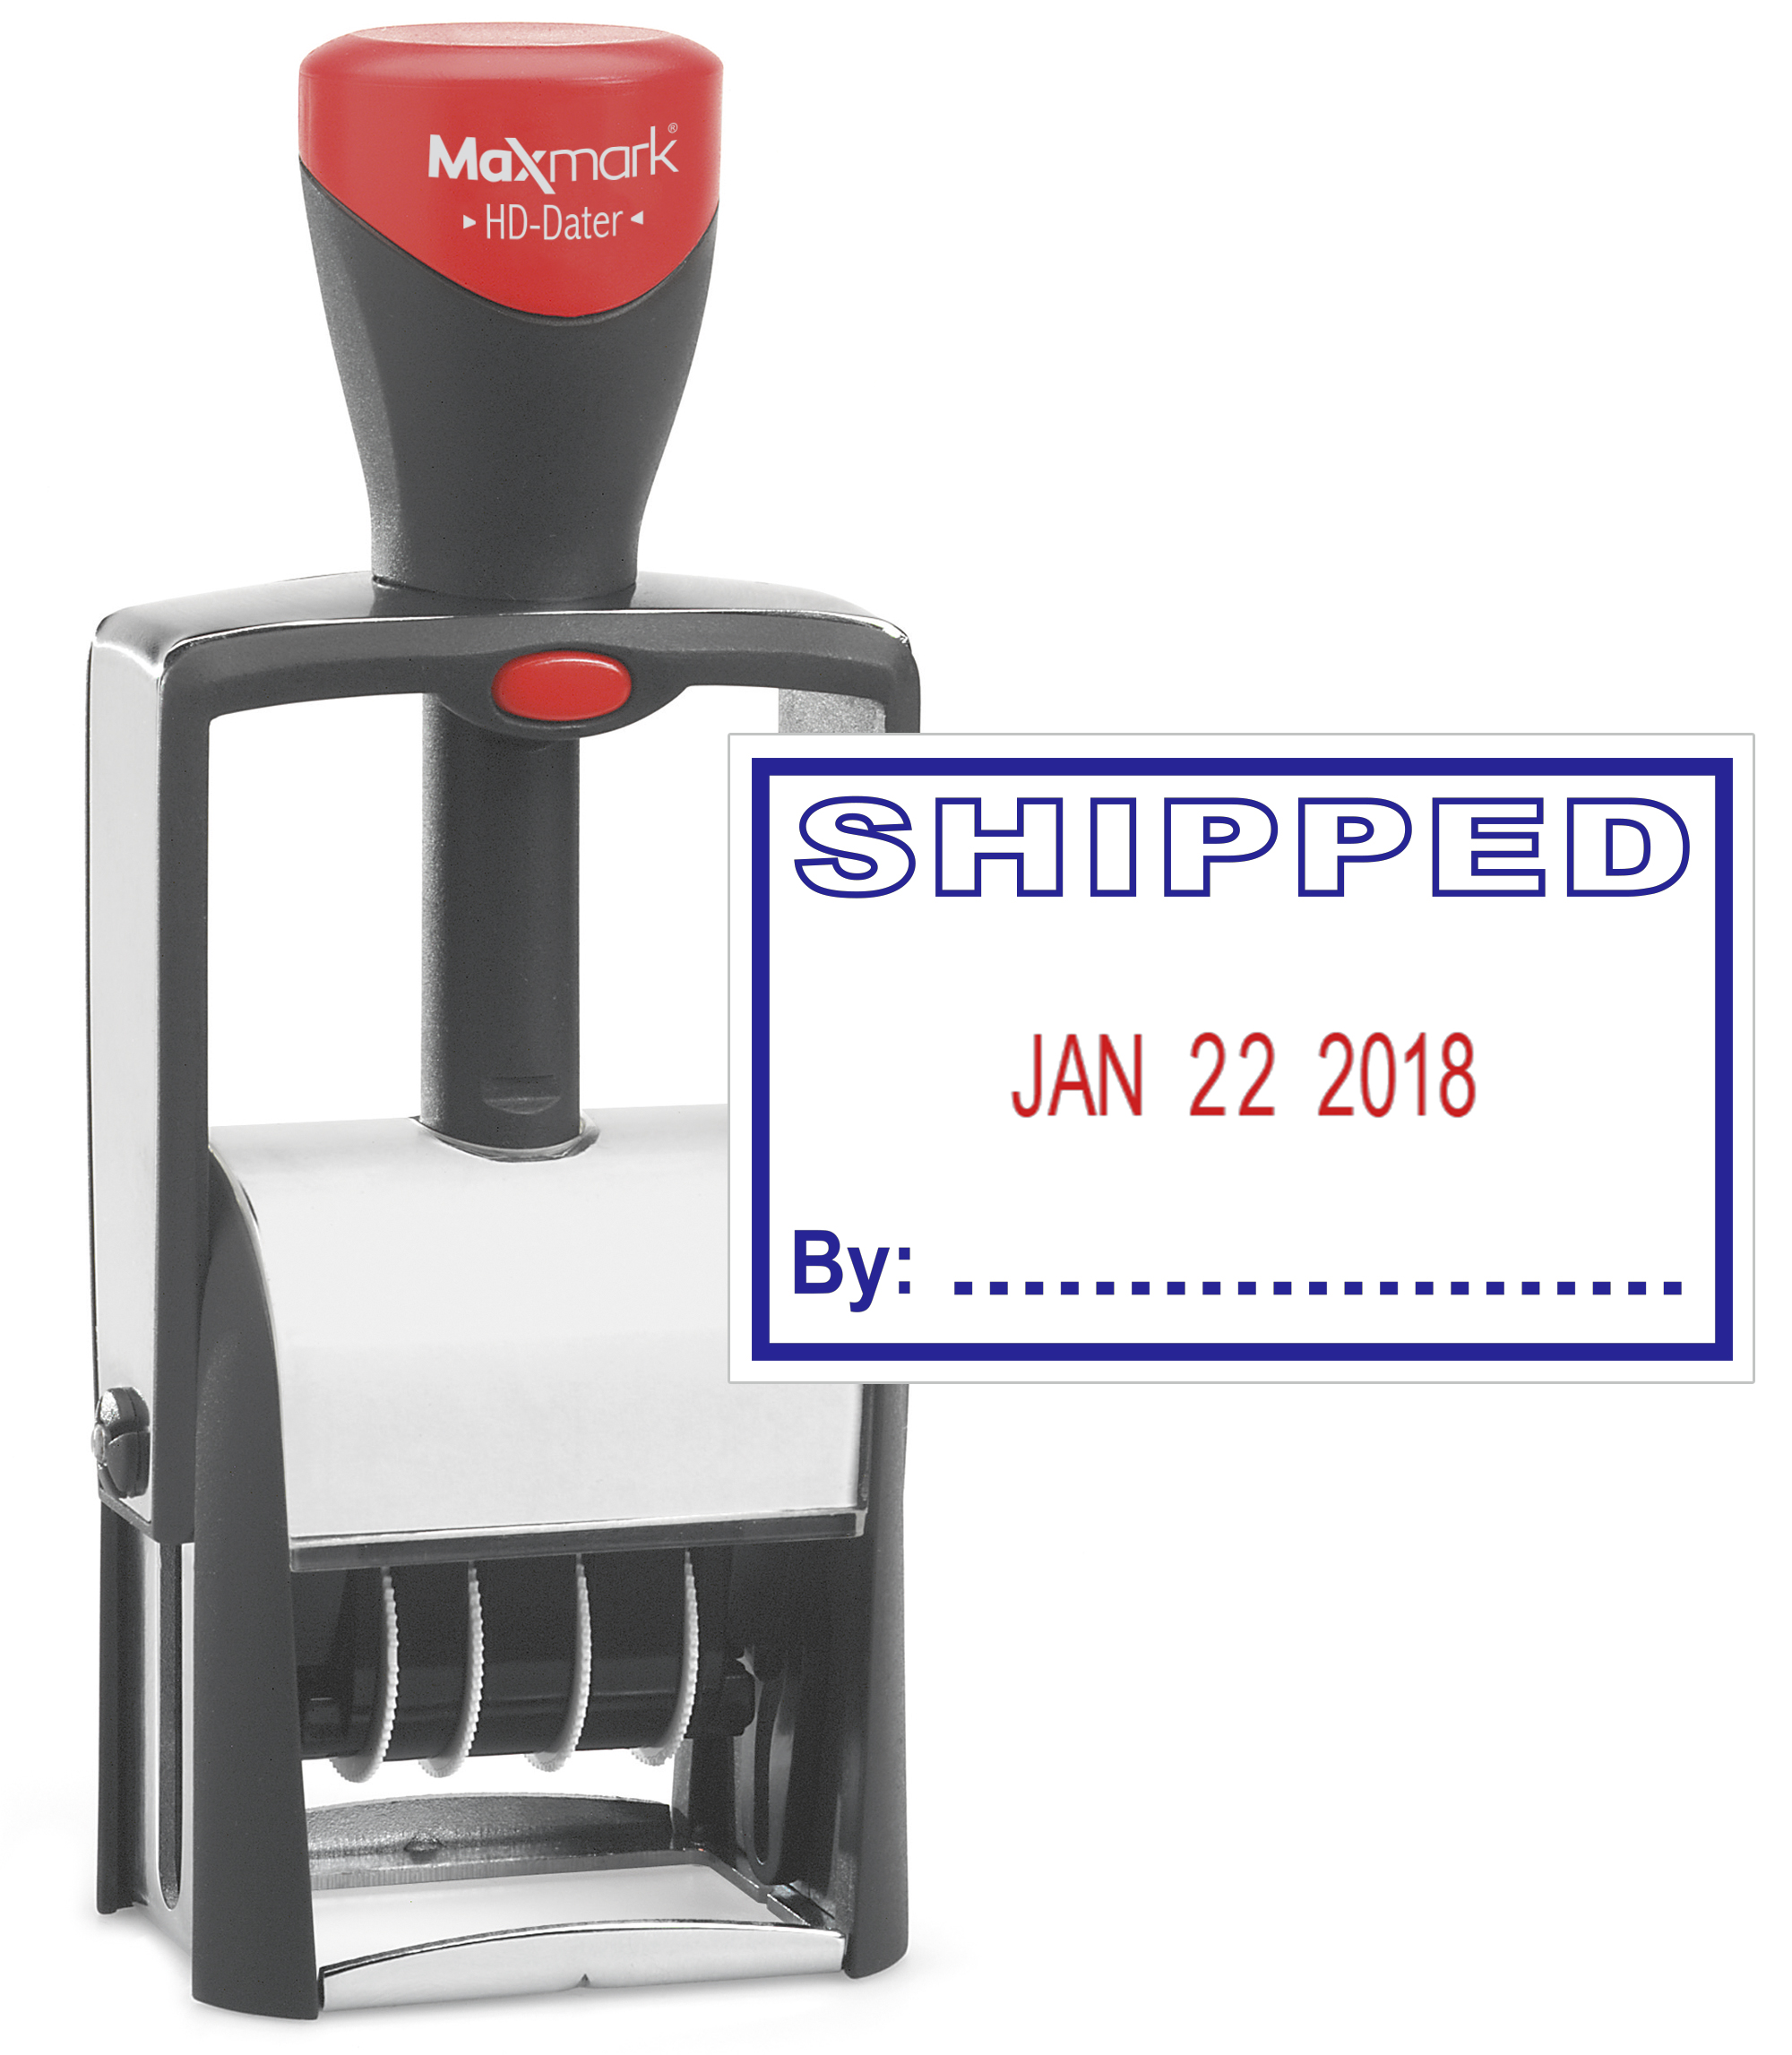 Heavy Duty Date Stamp with "SHIPPED" Self Inking Stamp - 2 Color Blue/Red Ink